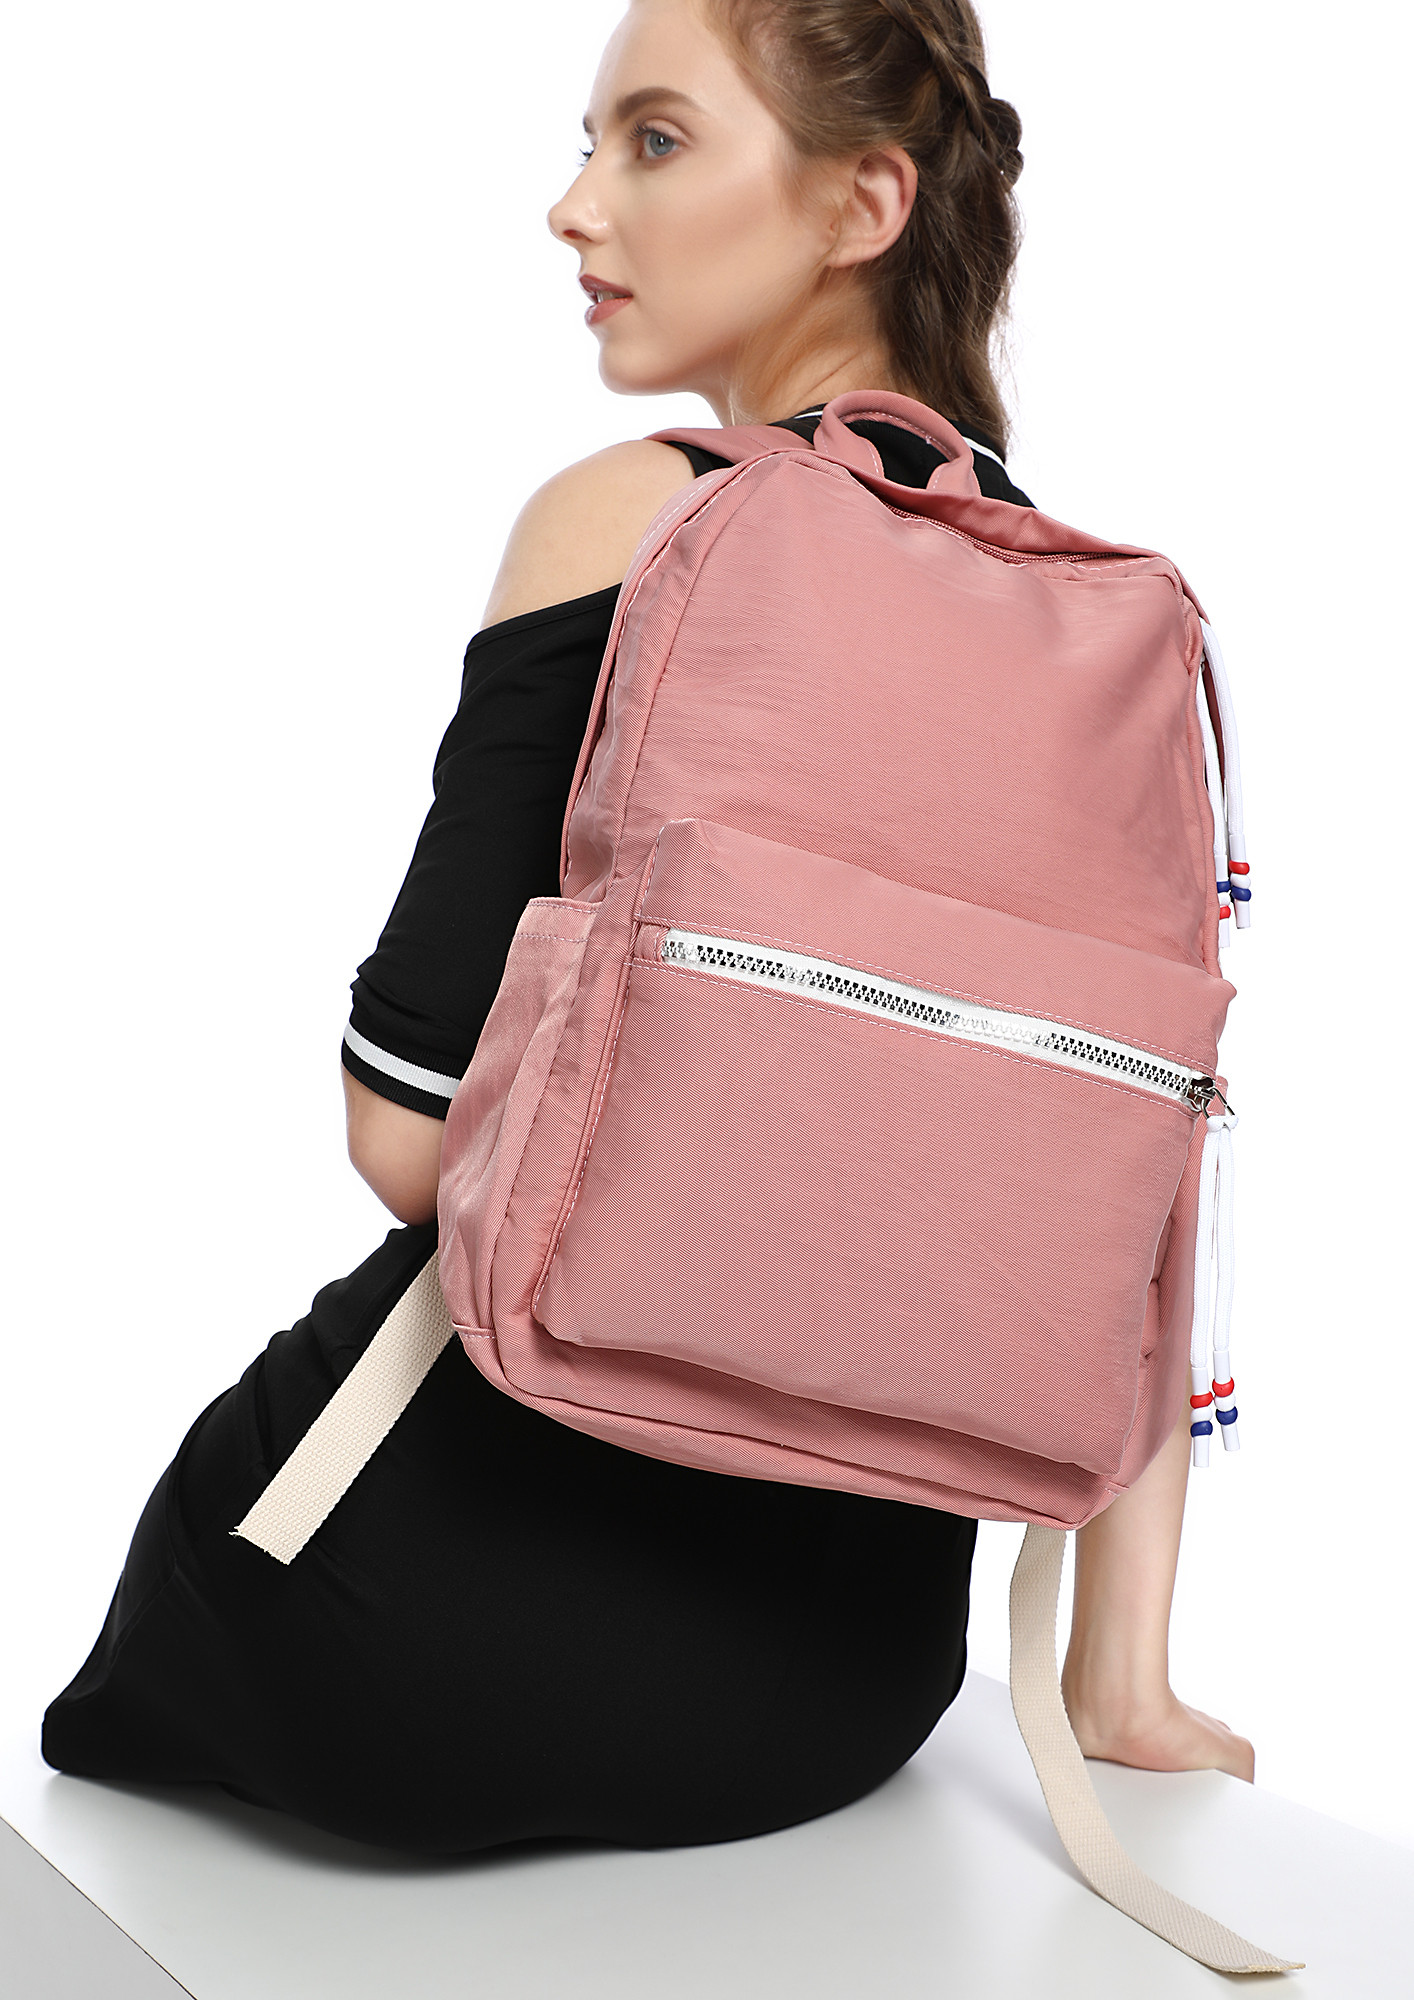 ALWAYS THE BEST CHOICE PINK BACKPACK